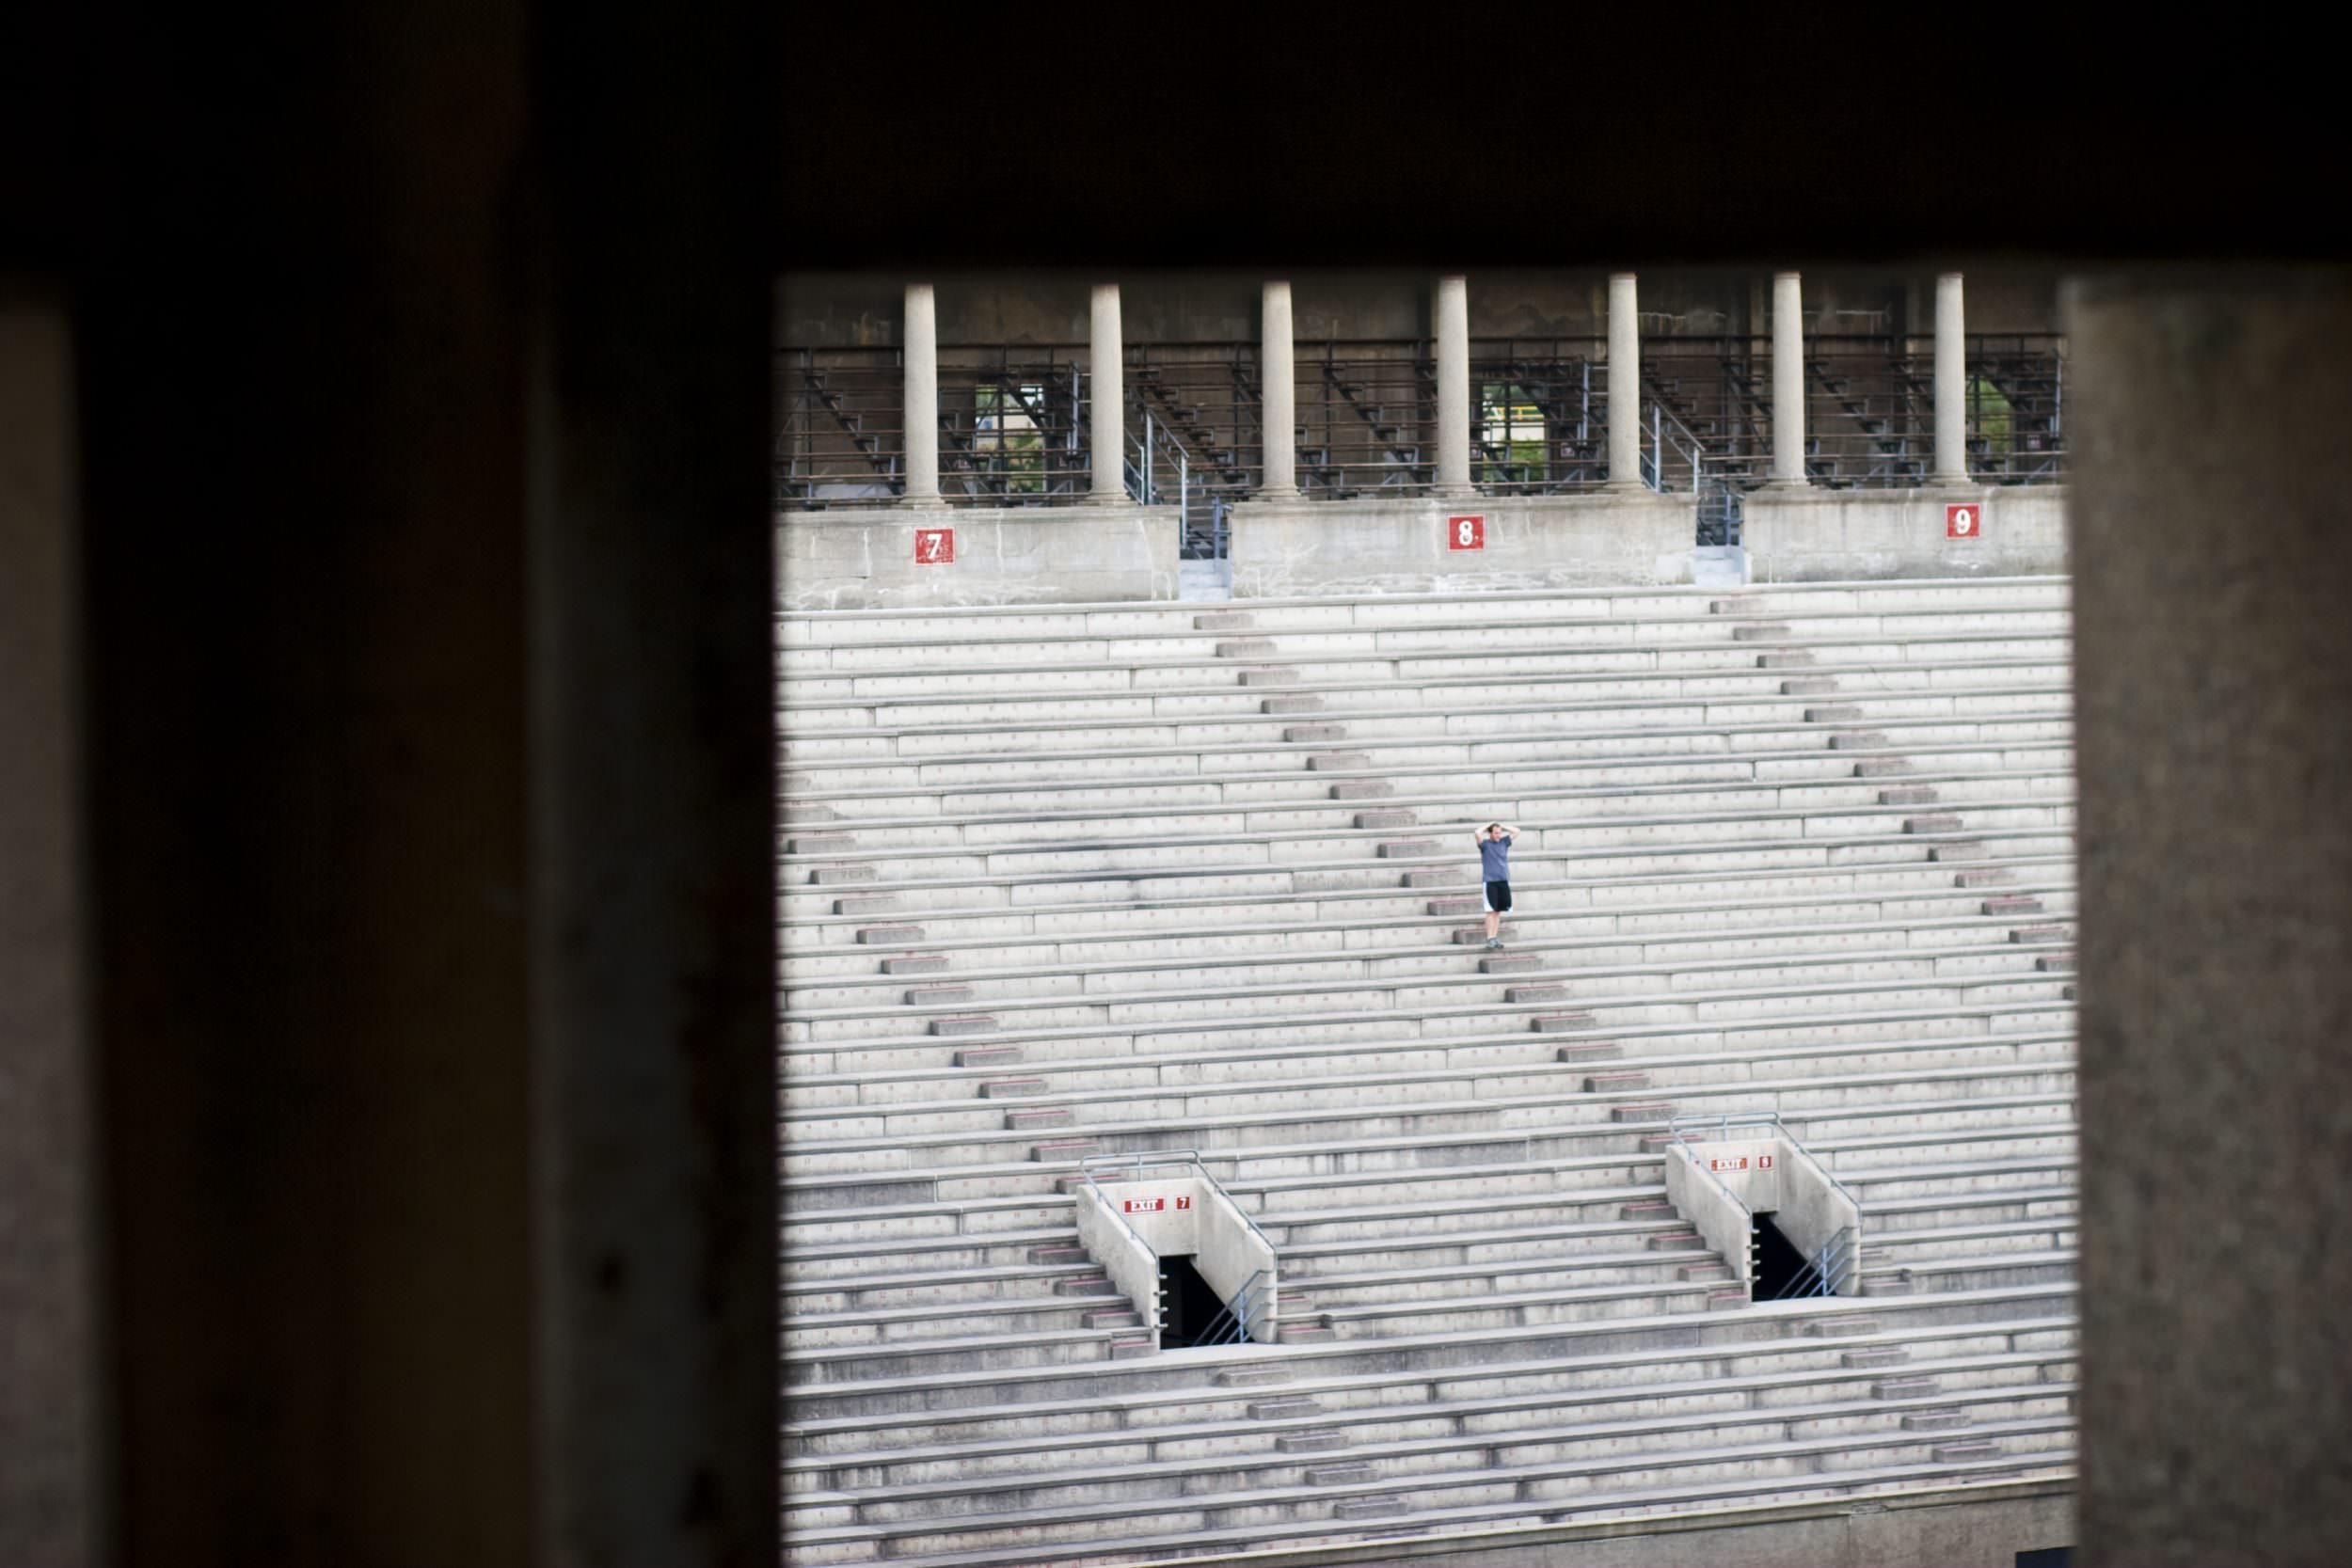 A runner stands on the steps of Harvard Stadium stairs.